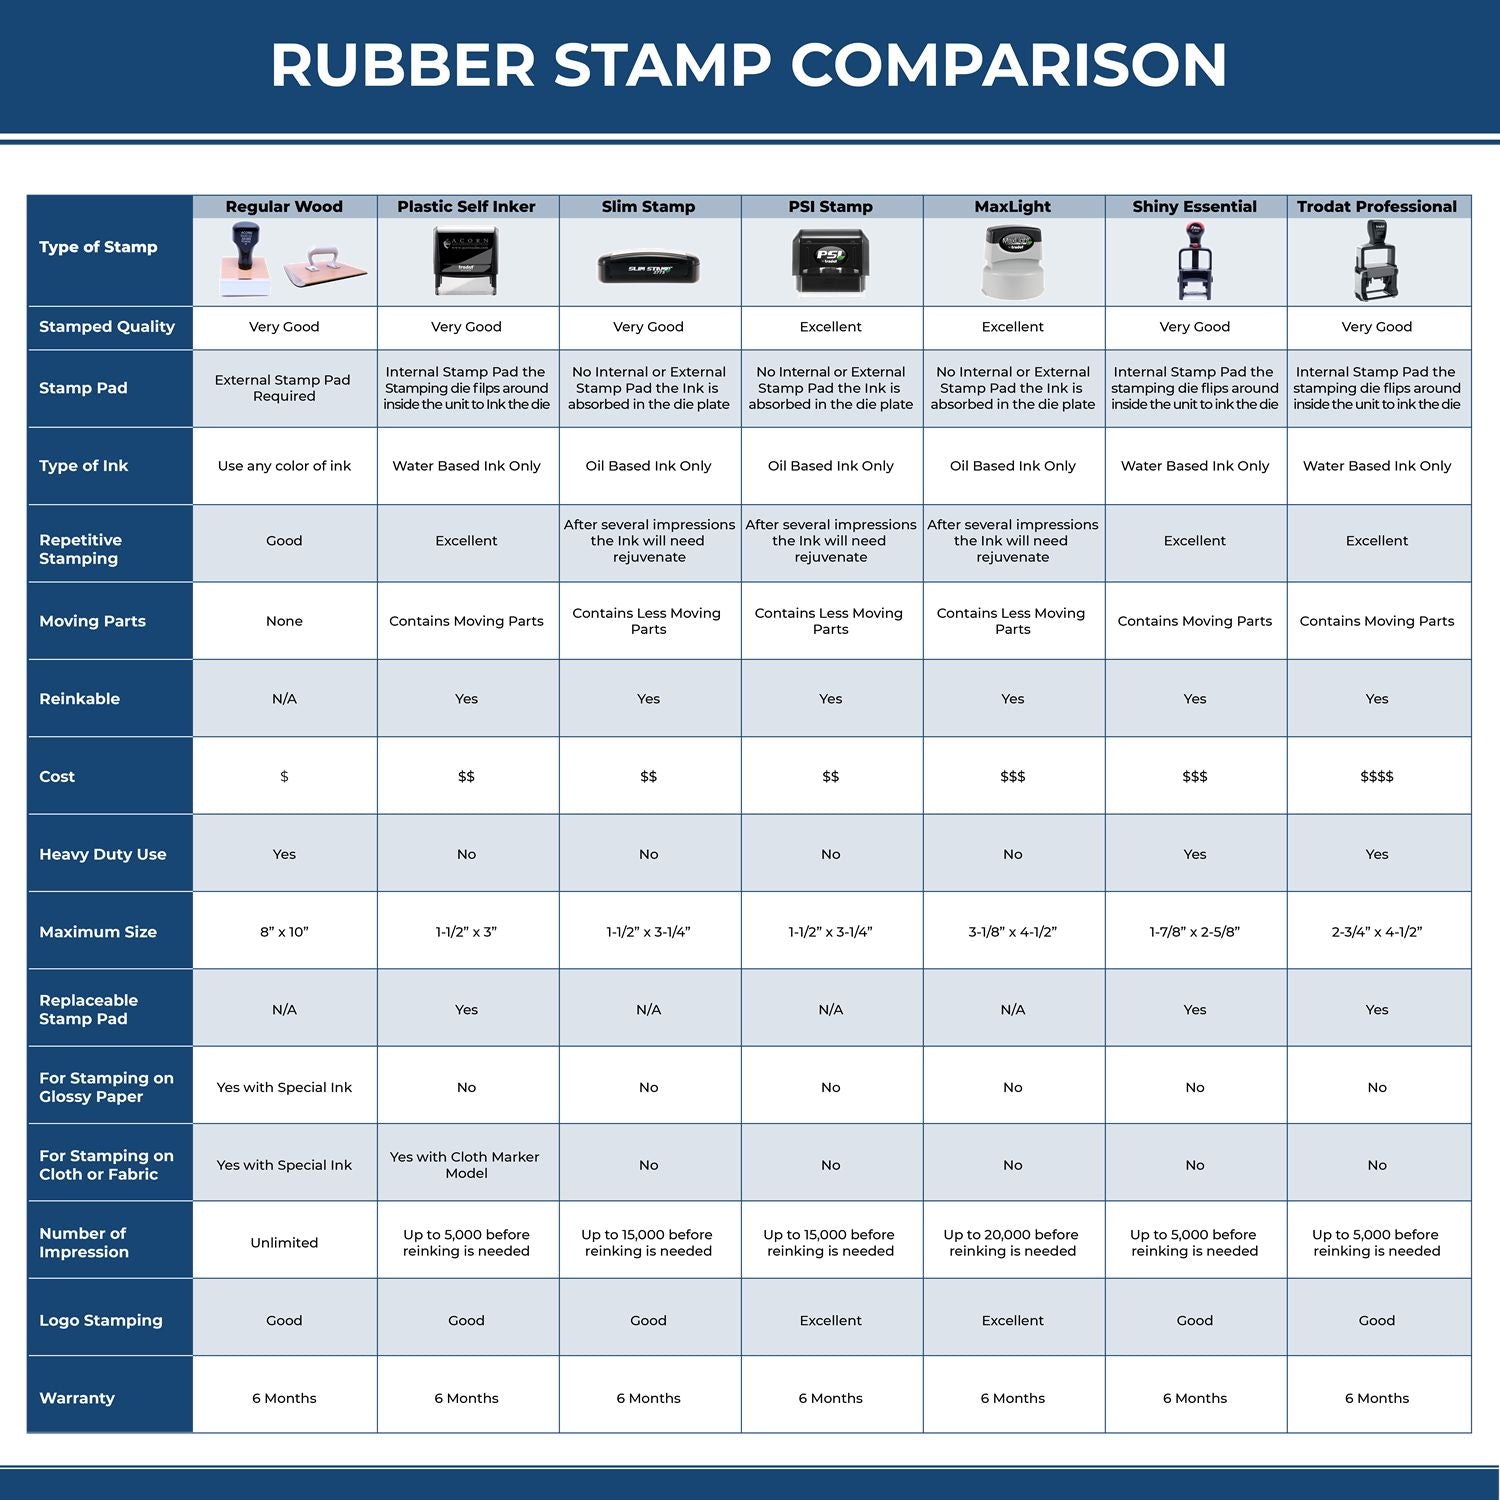 Large Office Copy Rubber Stamp 4949R Rubber Stamp Comparison